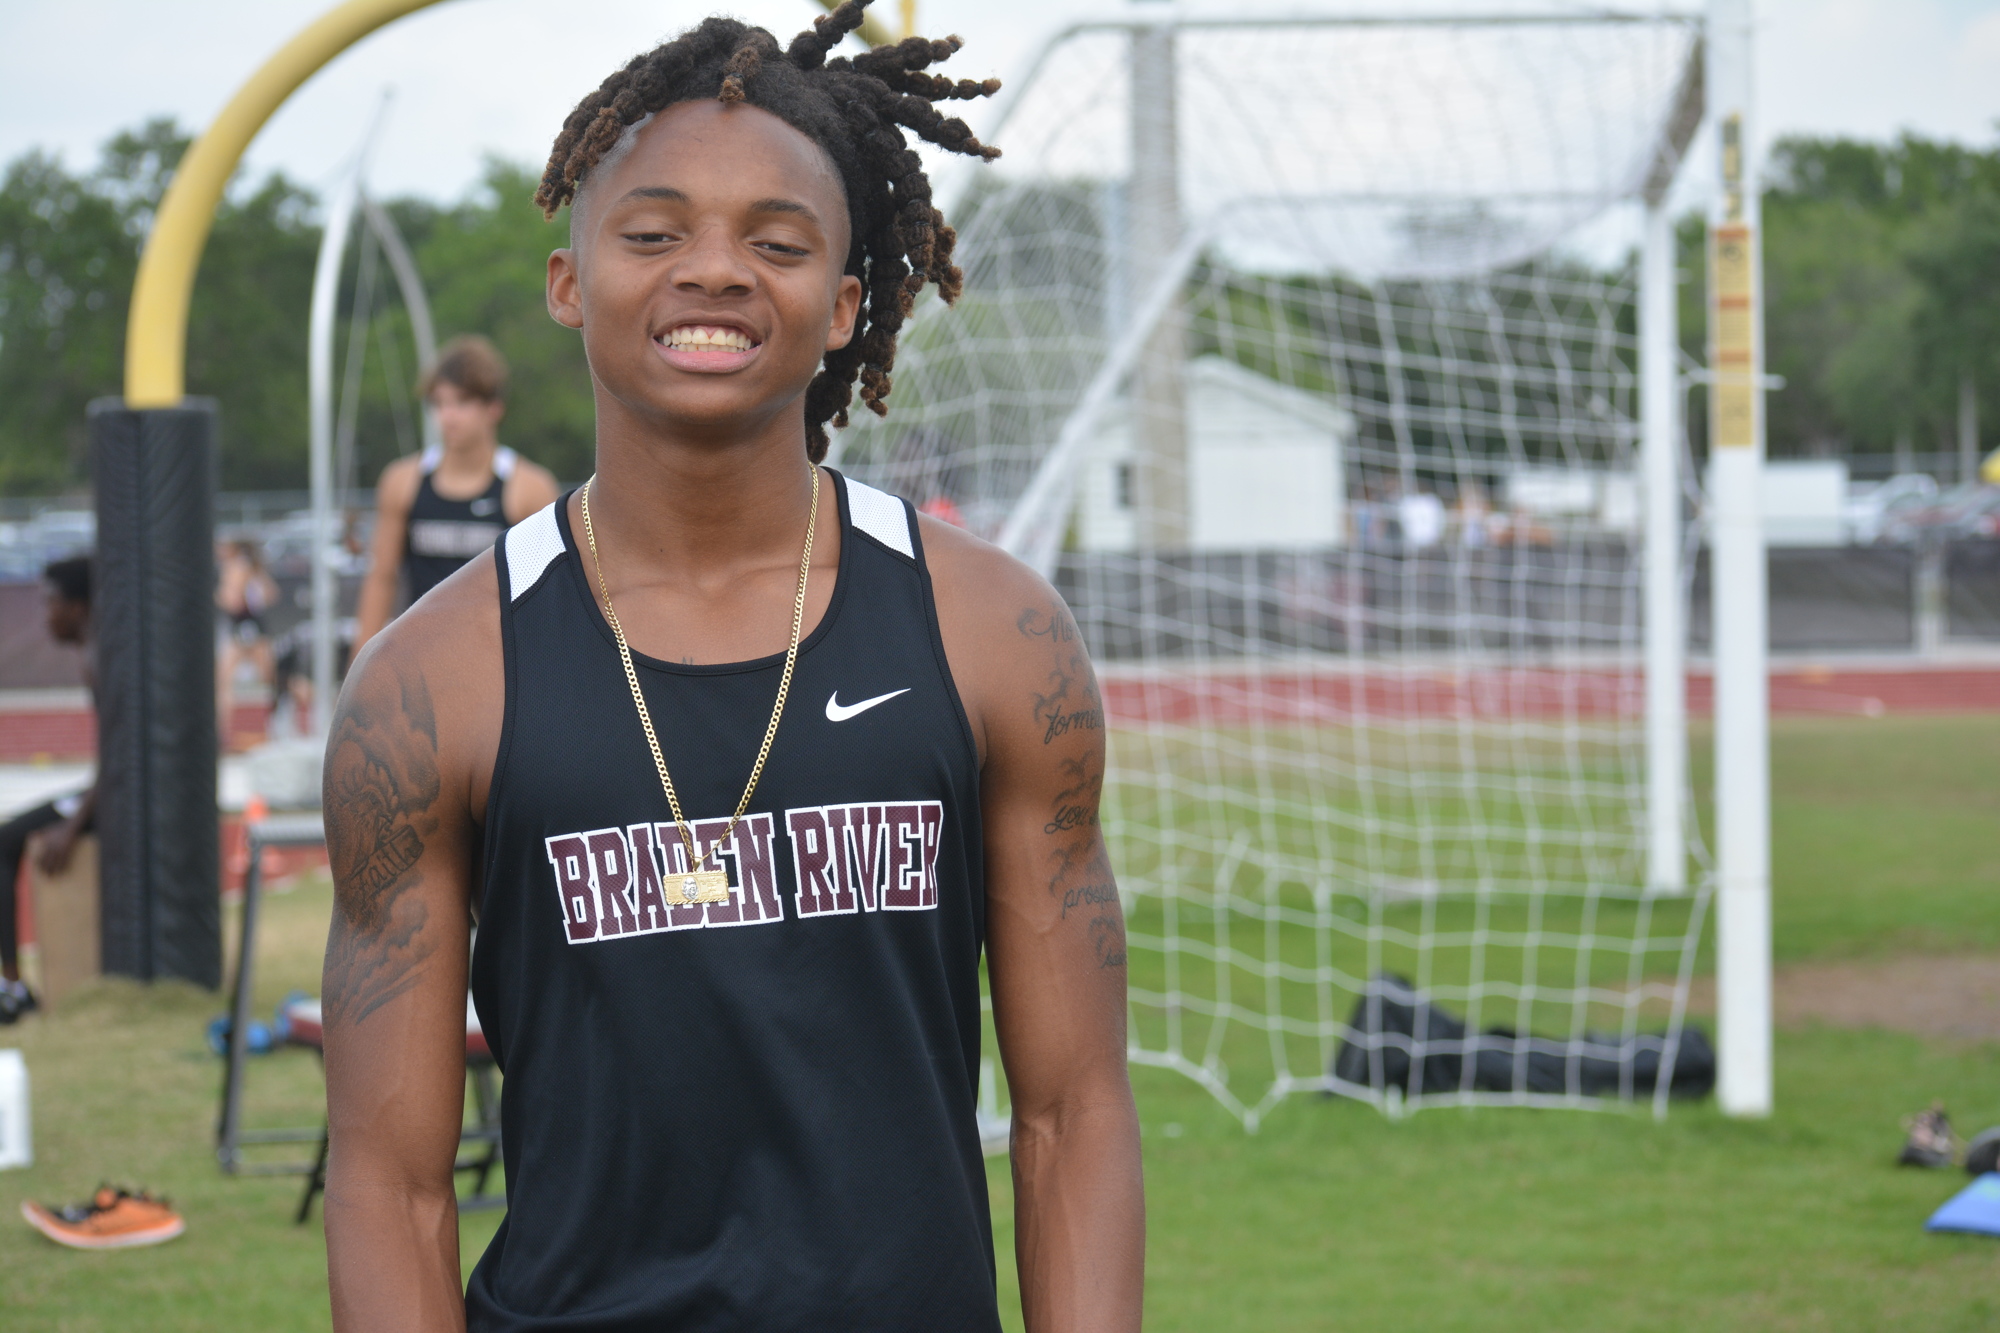 Josh Thomas is Braden River's record holder in the 100-meter (10.52) and 200-meter (21.66) dashes at the Braden River Invitational.